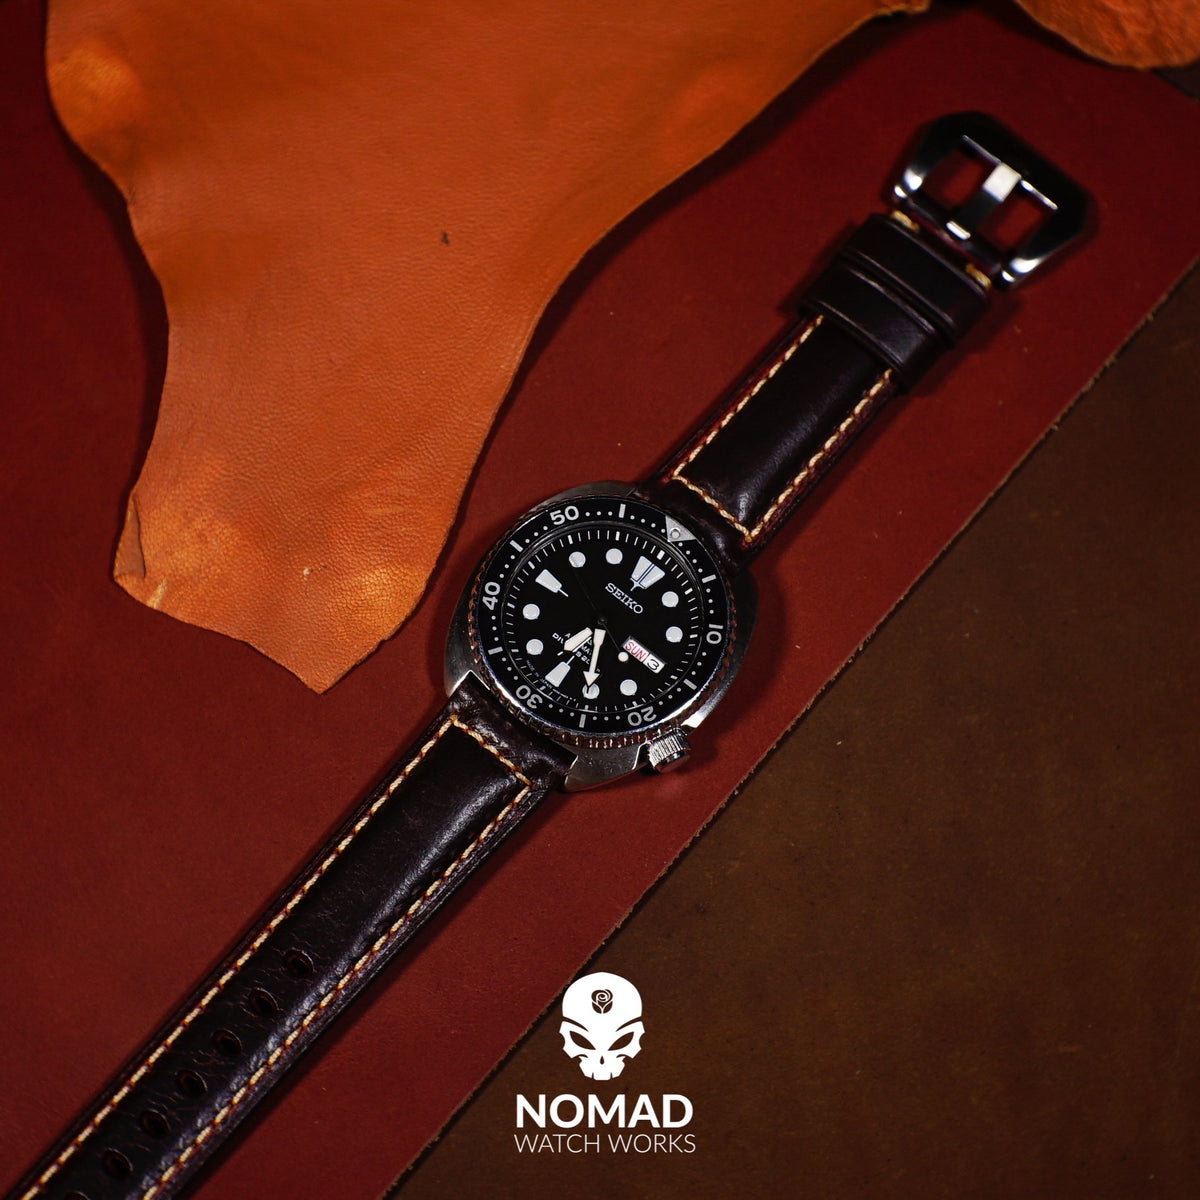 M2 Oil Waxed Leather Watch Strap in Maroon